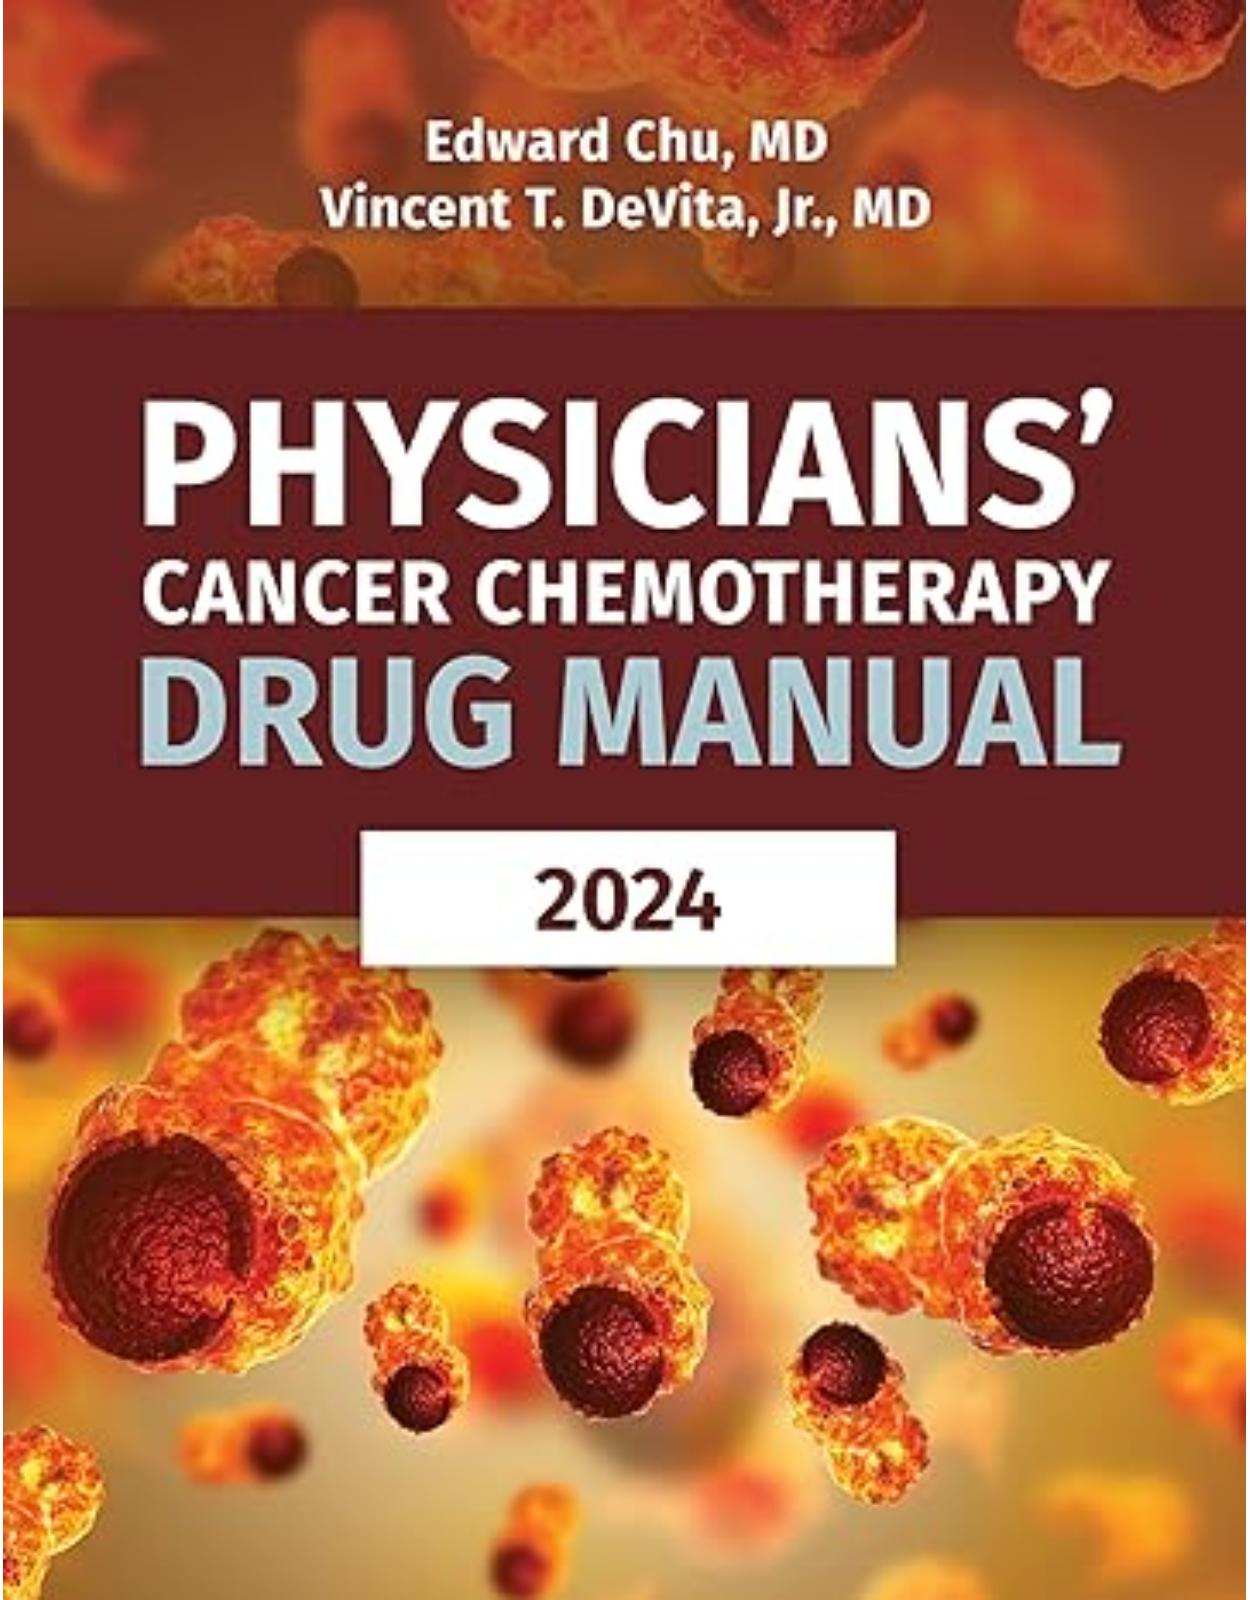 Physicians’ Cancer Chemotherapy Drug Manual 2024